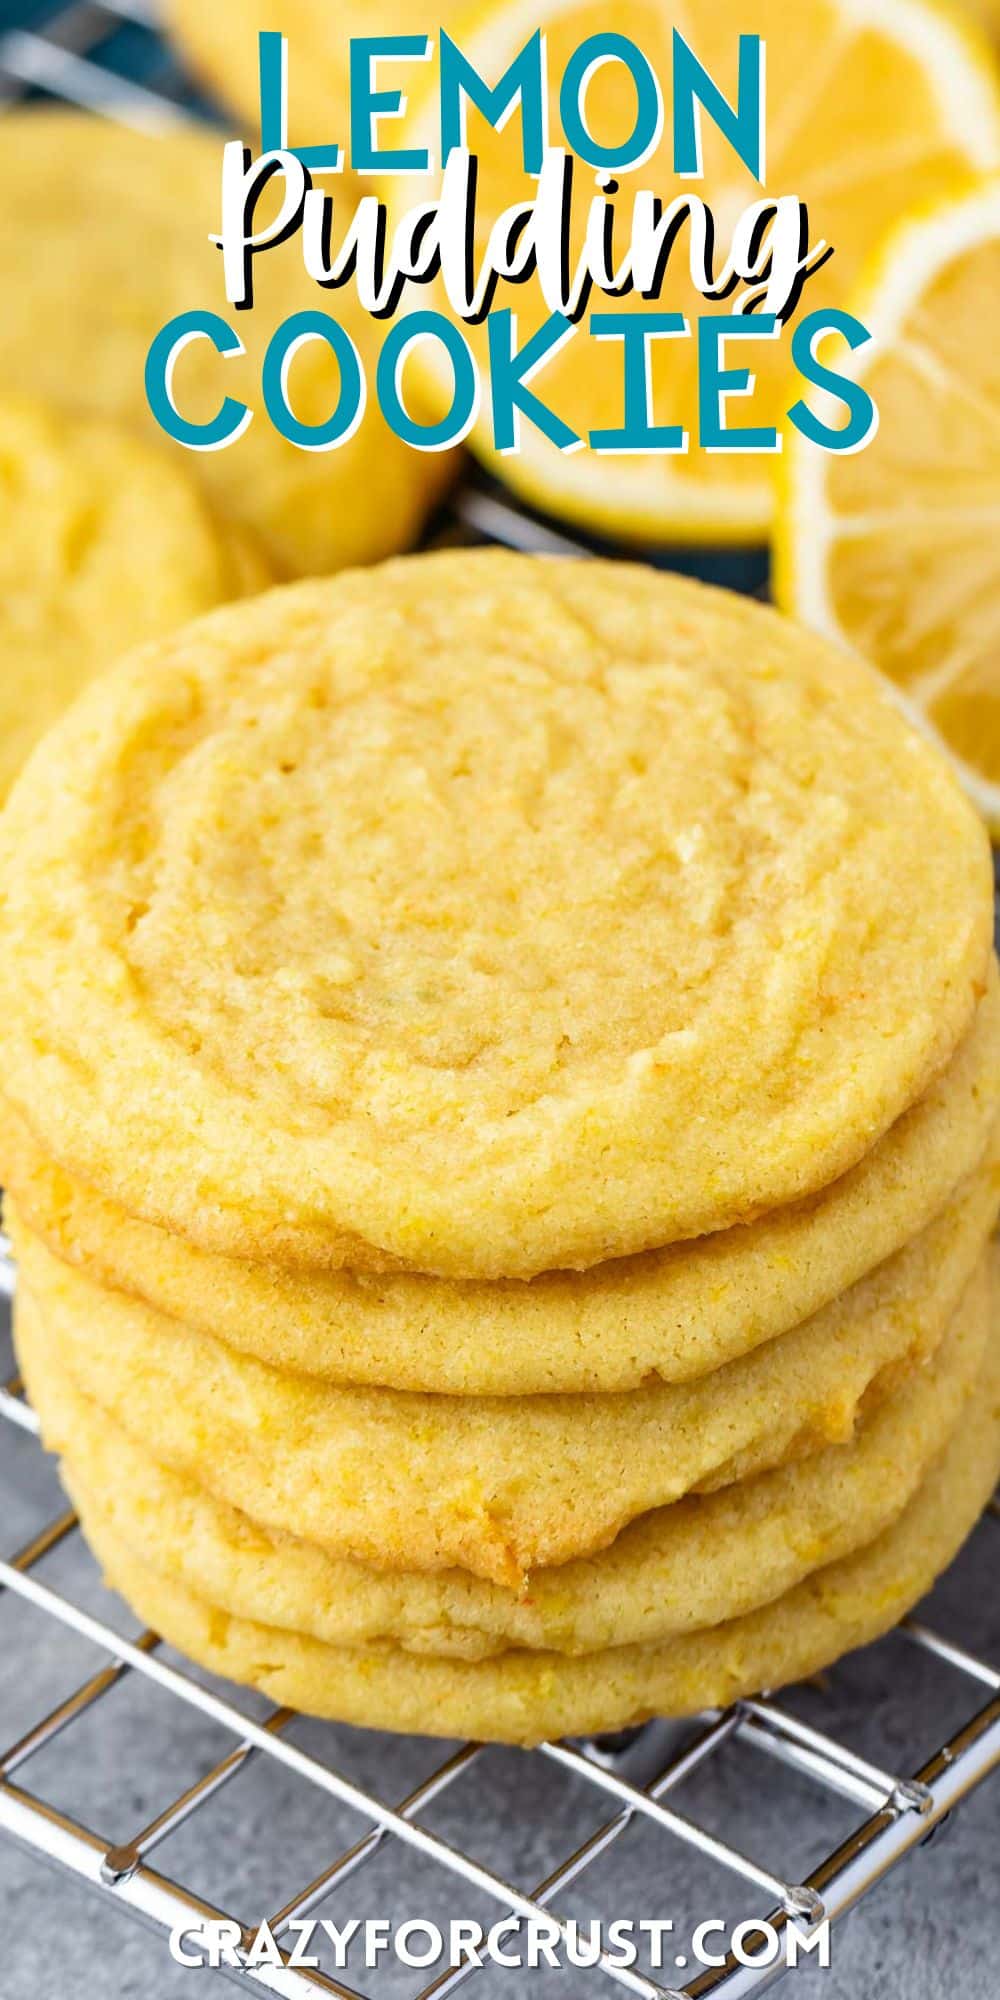 stacked lemon cookies with sliced lemons in the background with words on the image.